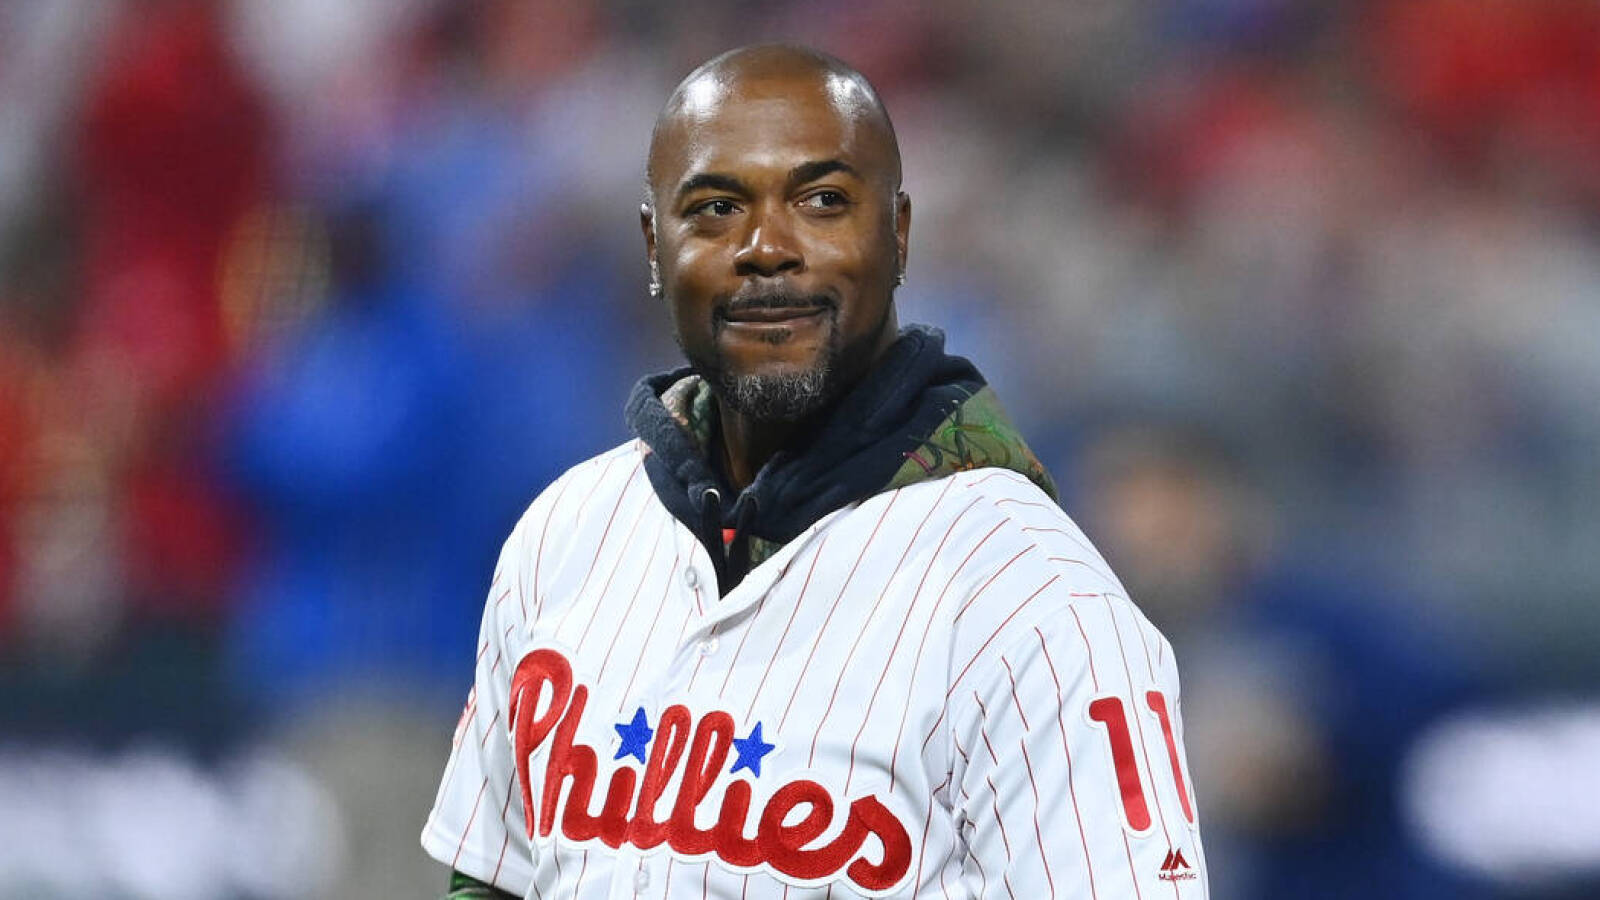 Phillies legend bashes HOF voters over lack of support for former SS Jimmy Rollins